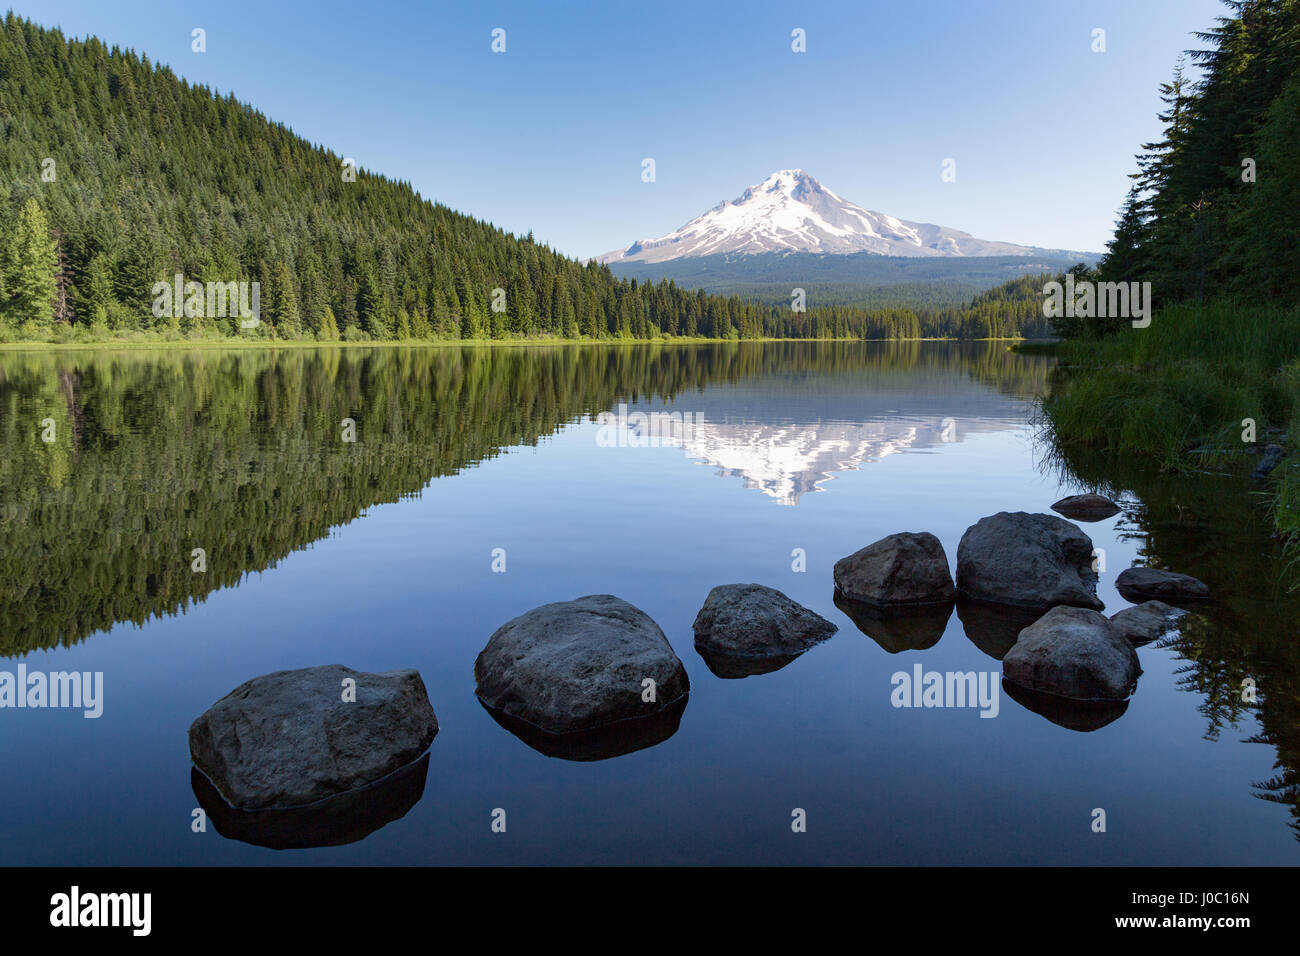 Mount Hood, part of the Cascade Range, perfectly reflected in the still waters of Trillium Lake, Oregon, USA Stock Photo